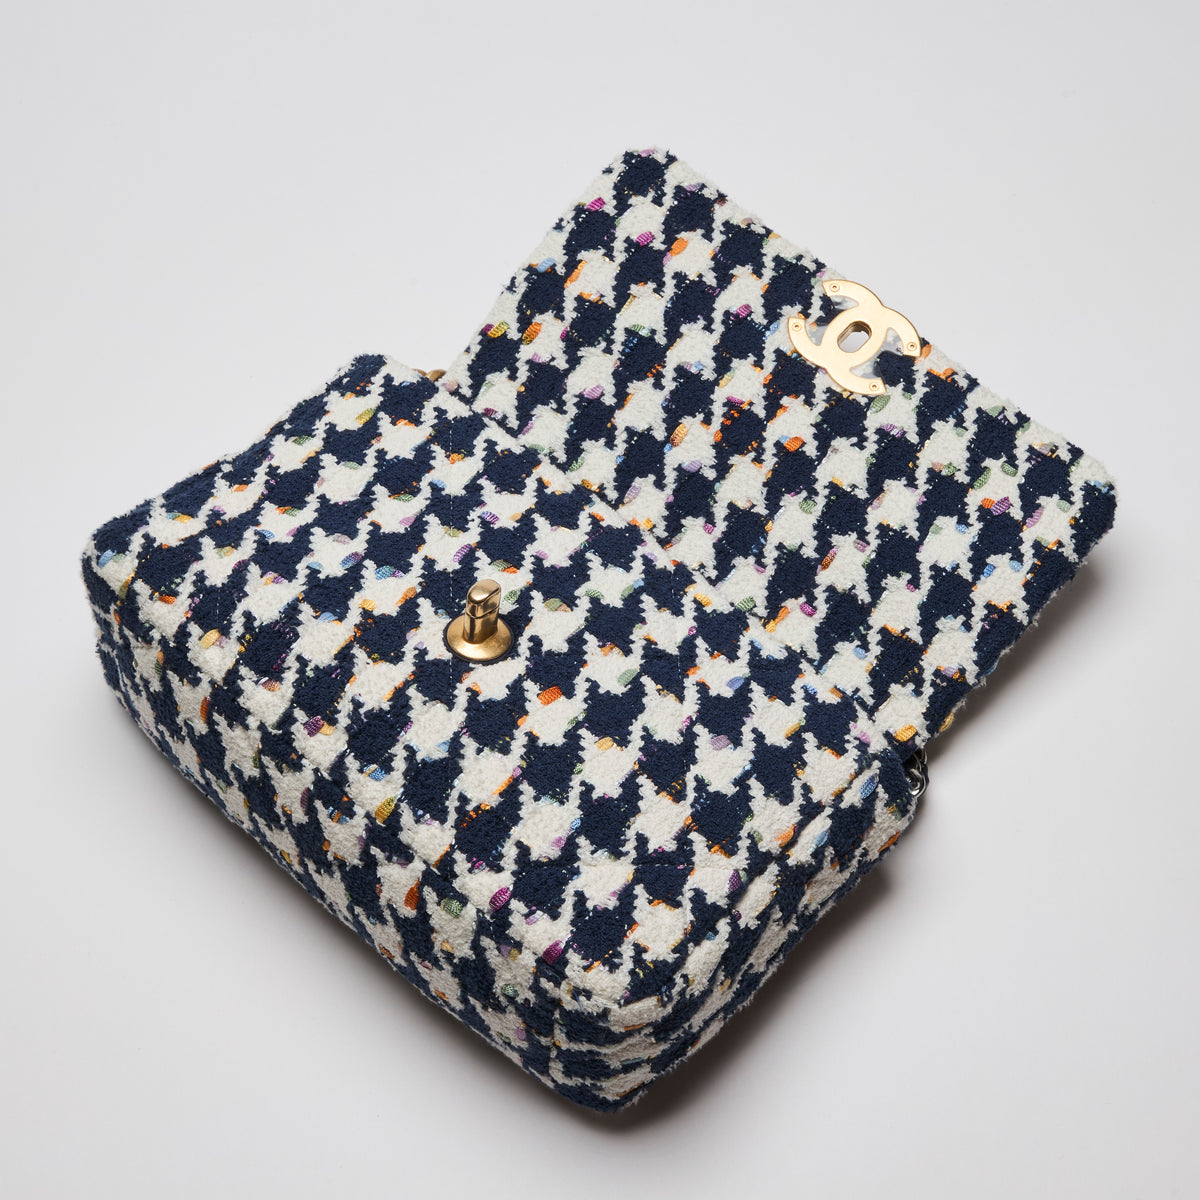 Excellent Pre-Loved Chanel Tweed Quilted Navy Blue Multicolor Small 19 Handbag (Front)